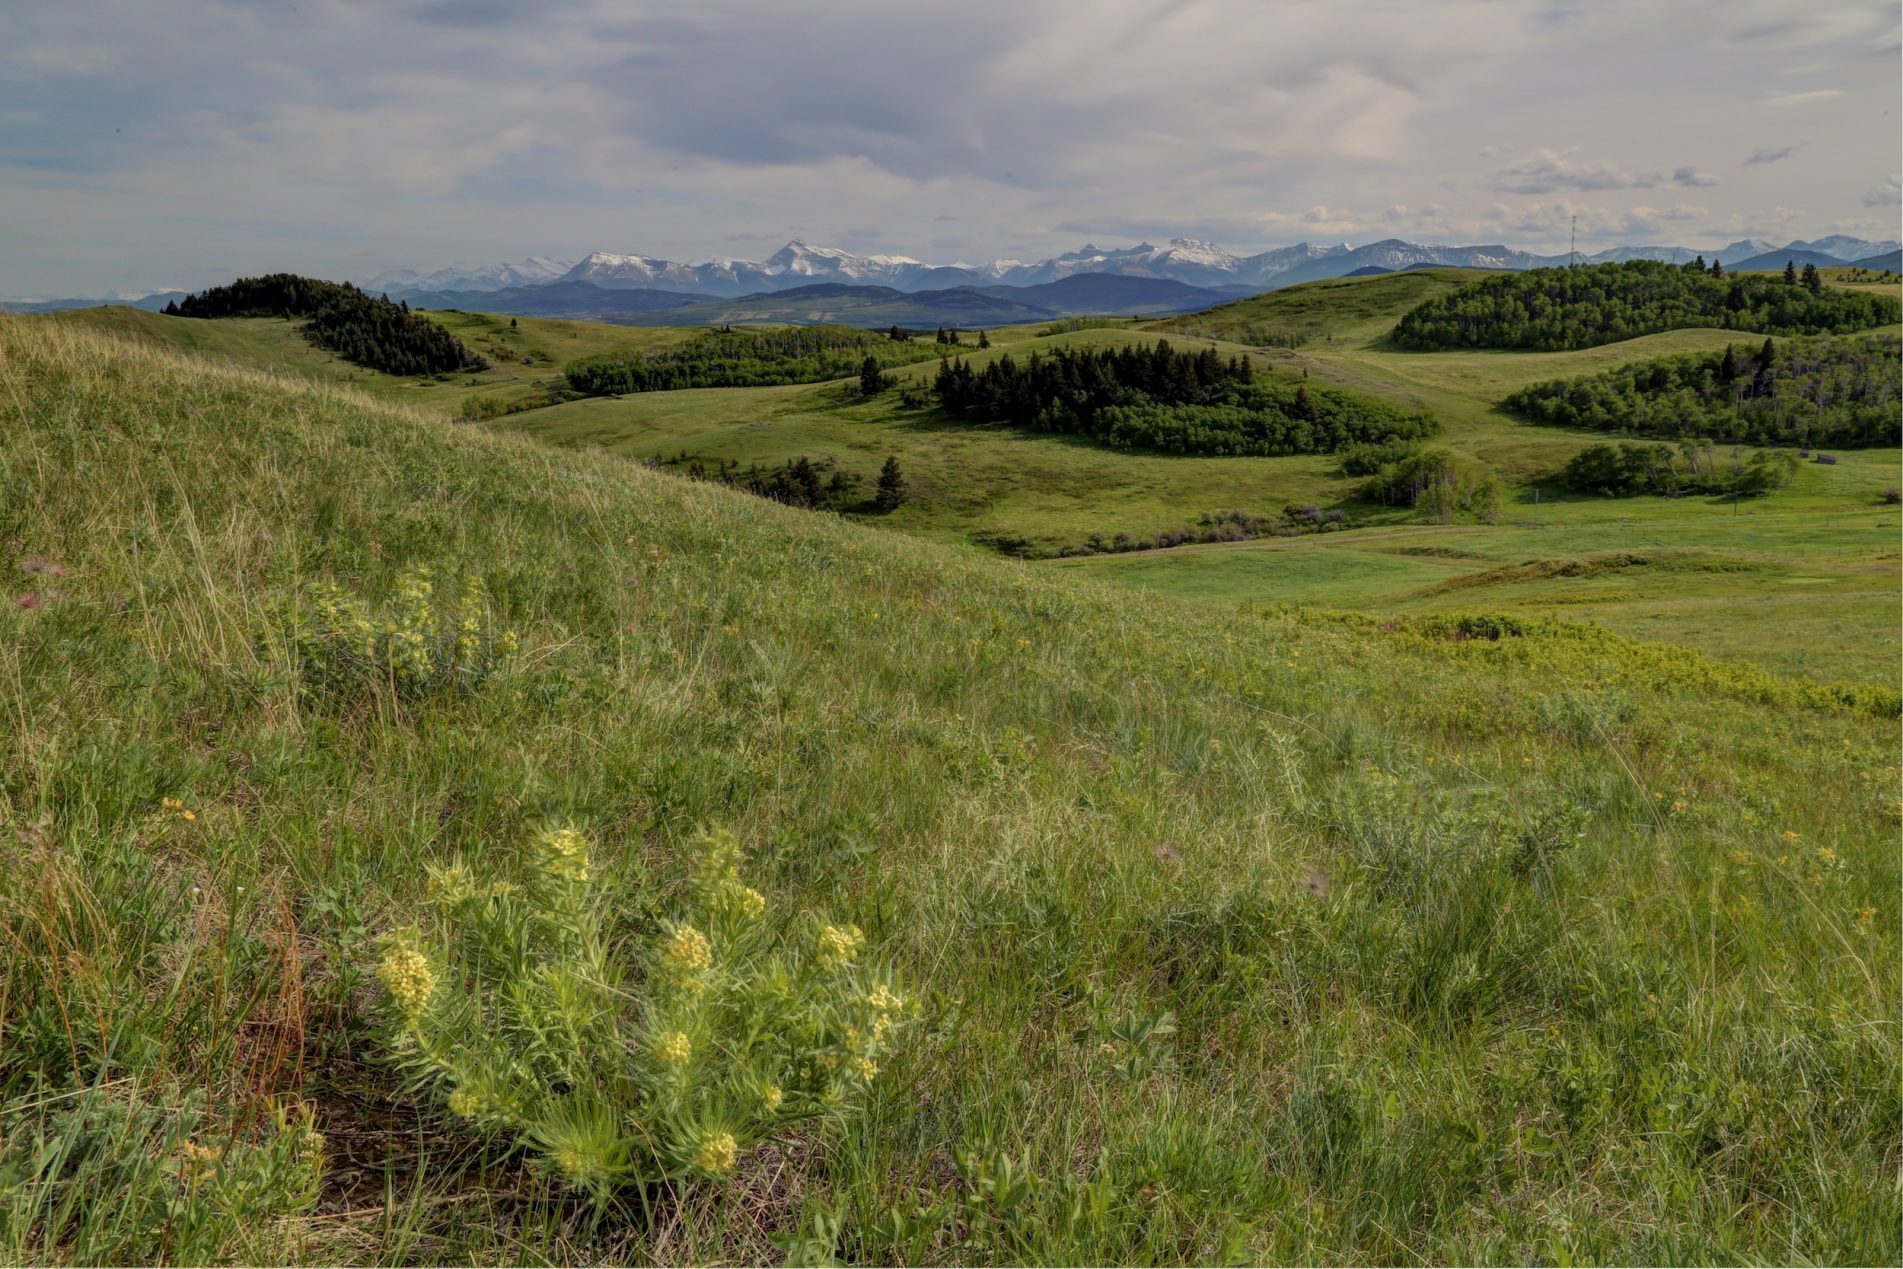 Climate Change Impacts on the Island Forests of the Great Plains and the Implications for Nature Conservation Policy: The Outlook for Sweet Grass Hills (Montana), Cypress Hills (Alberta- Saskatchewan), Moose Mountain (Saskatchewan), Spruce Woods (Manitoba) and Turtle Mountain (Manitoba- North Dakota)